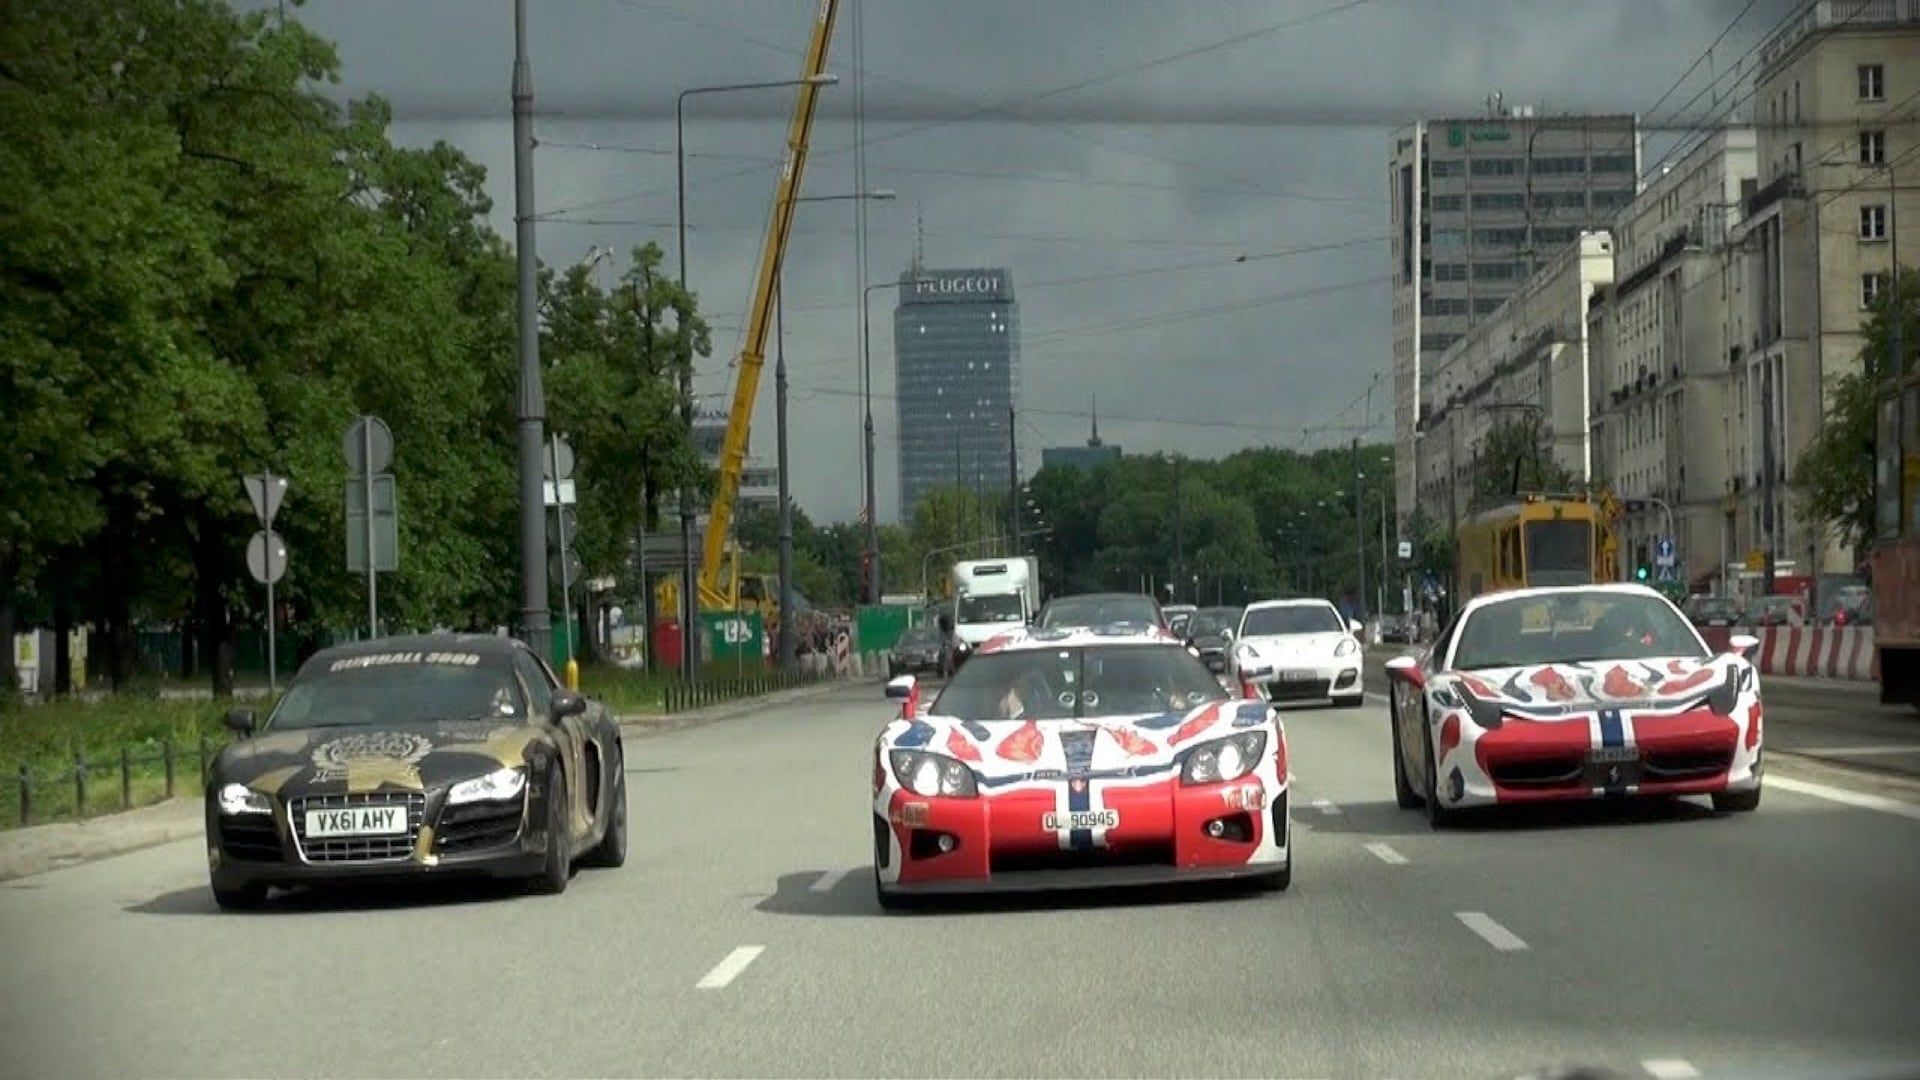 Gumball 3000 background